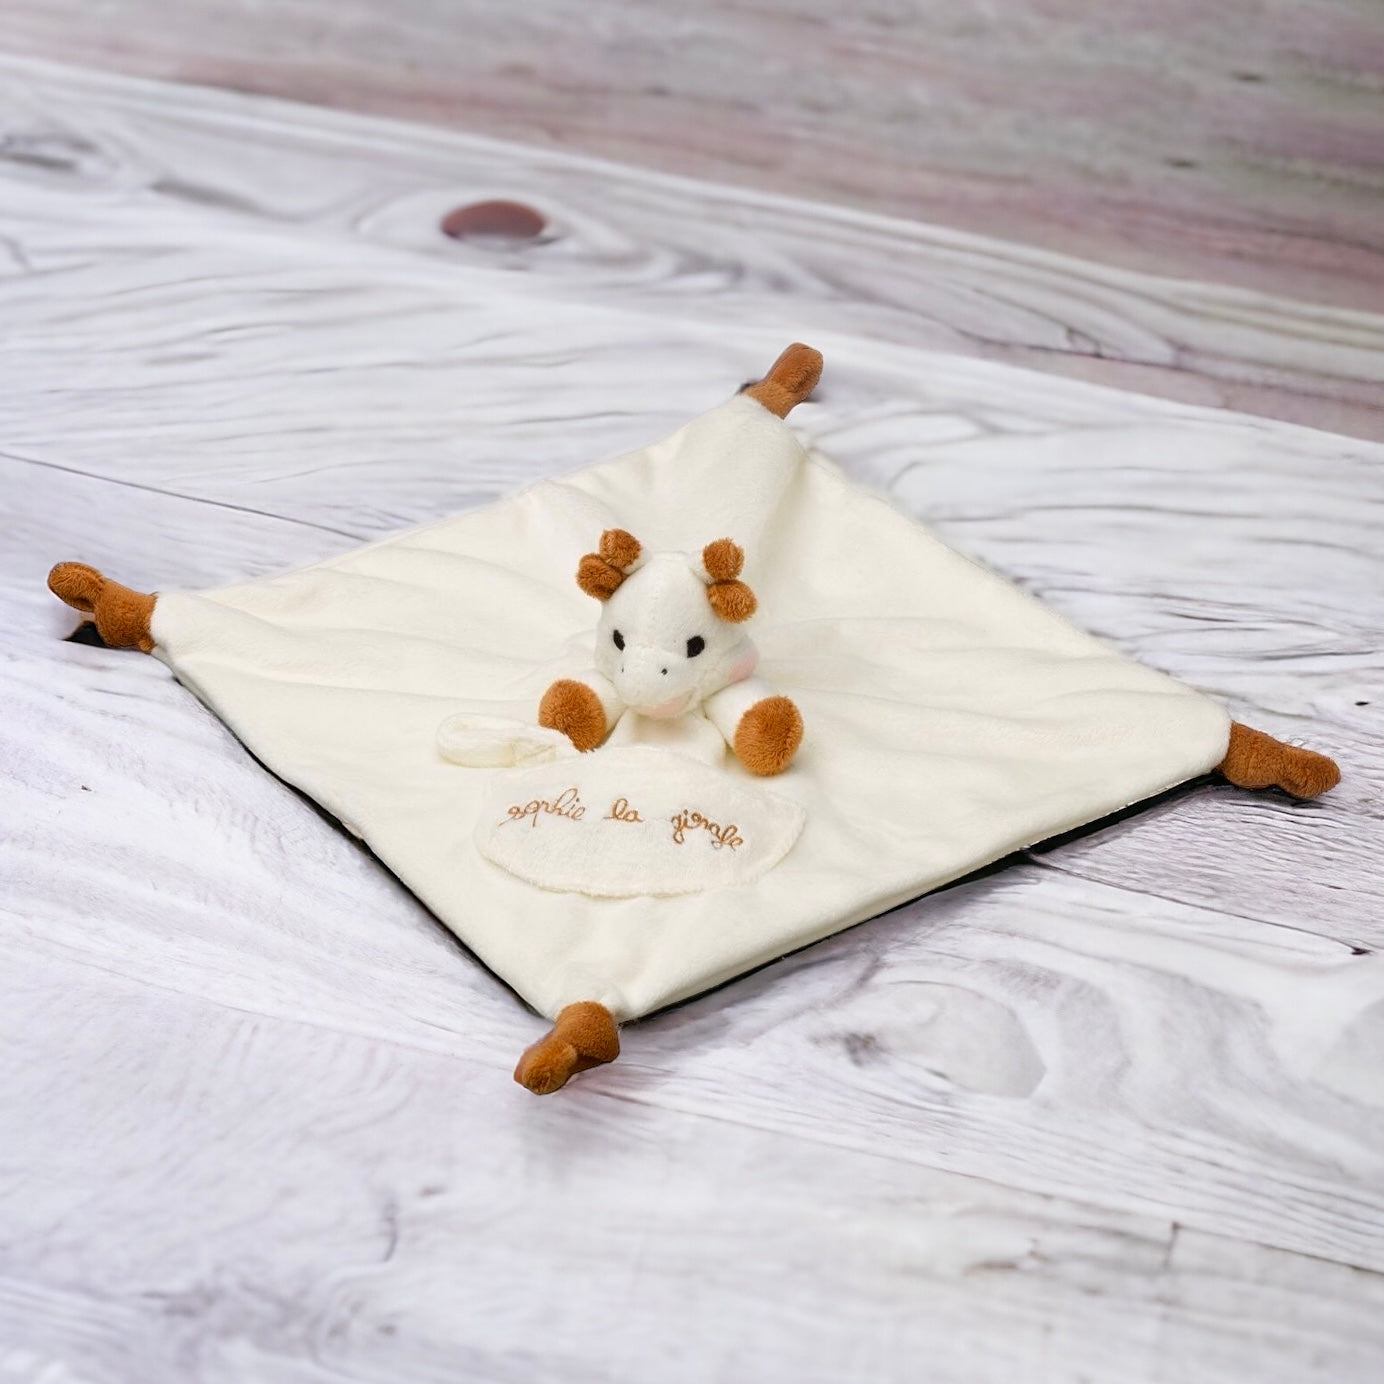 Sophie the Giraffe comforter with soother holder